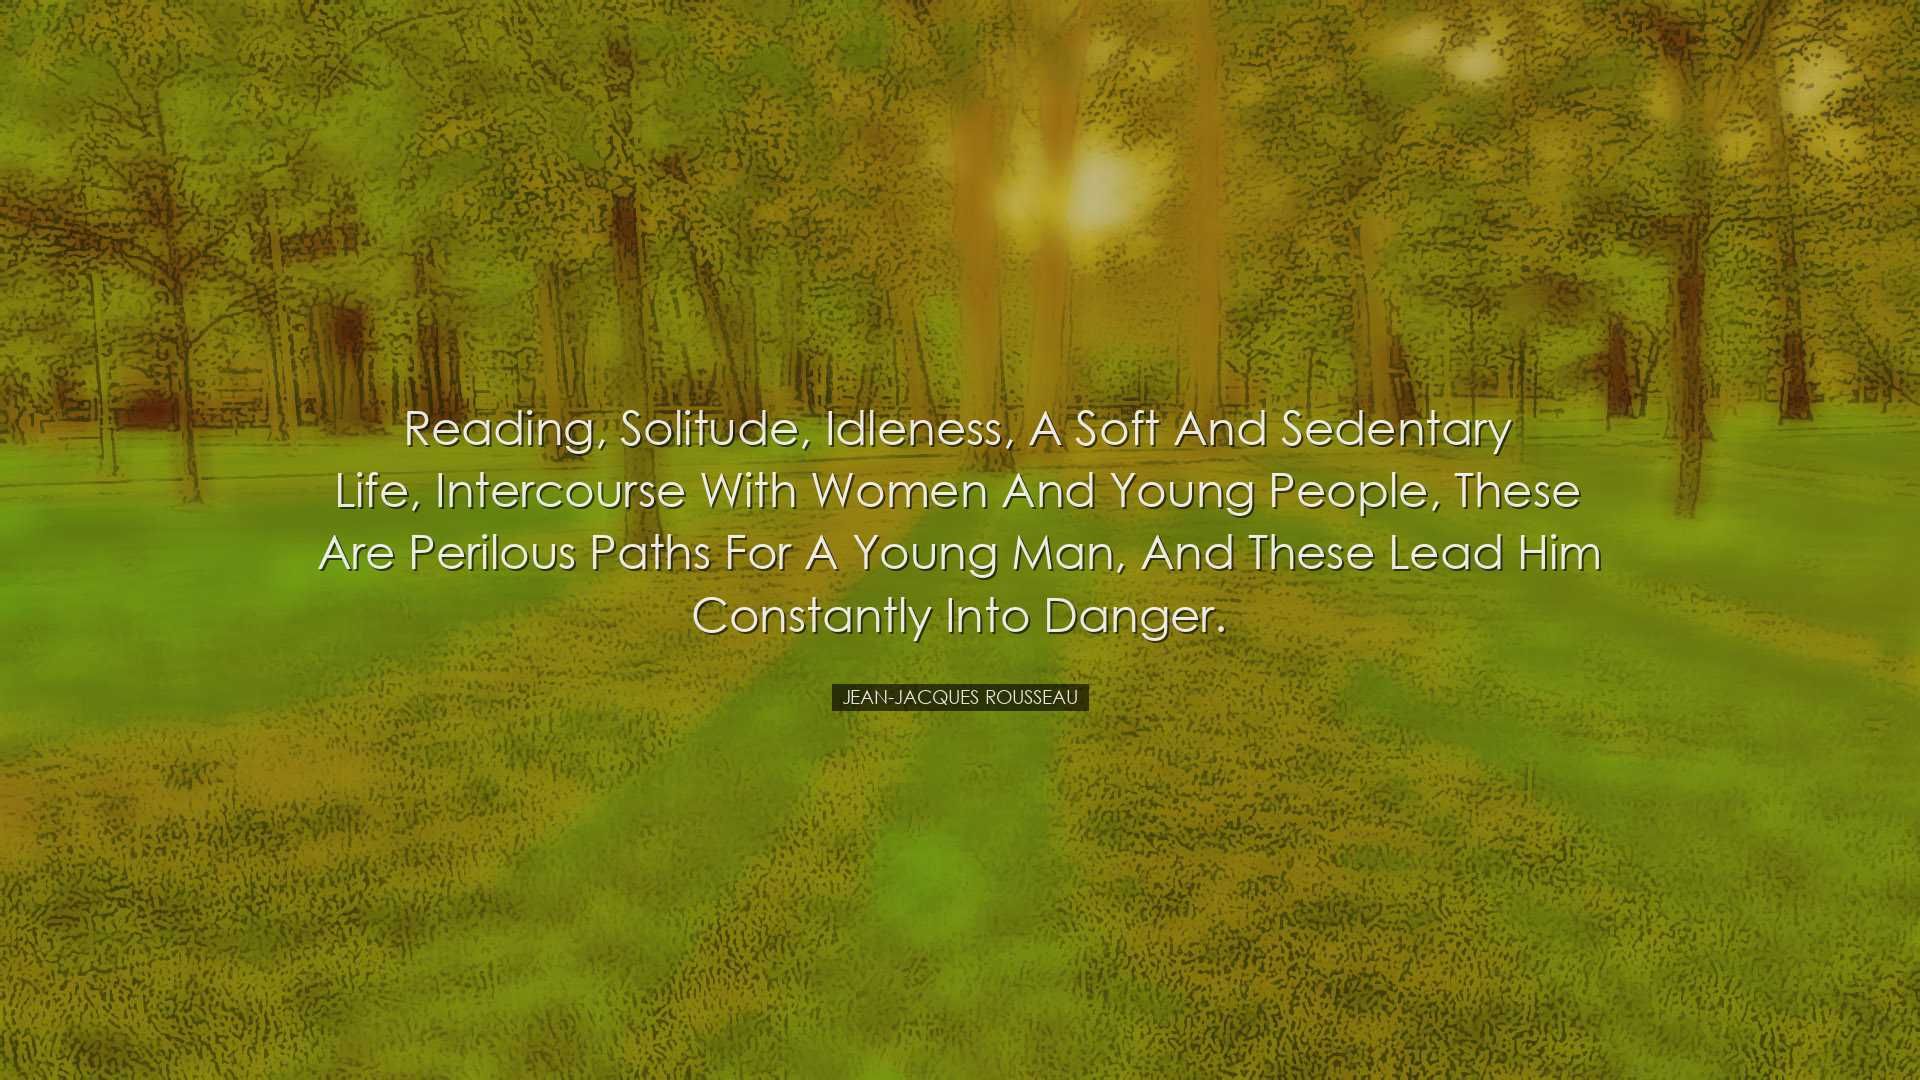 Reading, solitude, idleness, a soft and sedentary life, intercours